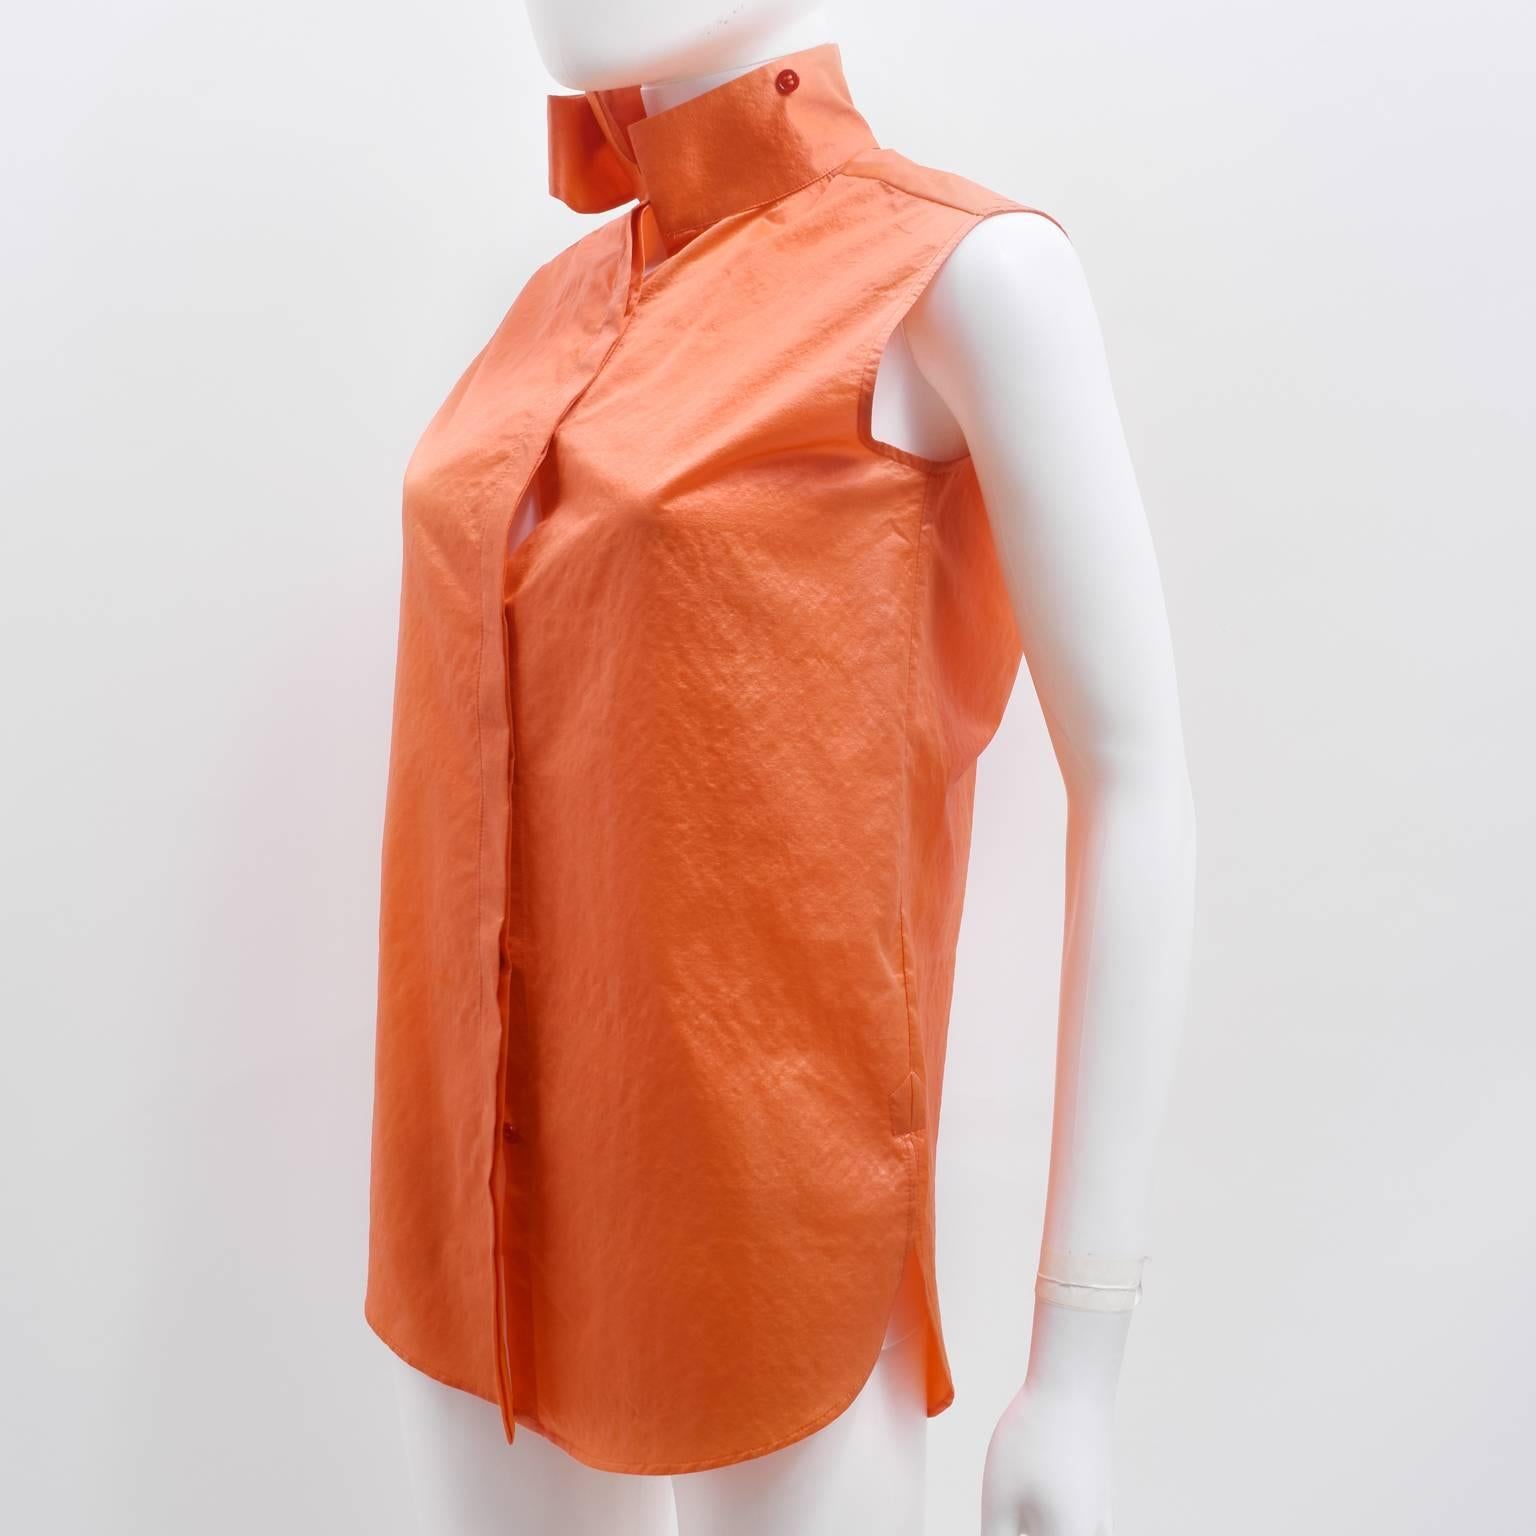 A contemporary sleeveless shirt in a bright orange silk blend material from Balenciaga. The shirt has a straight, slightly oversized cut with a concealed button fastening. It also has an interesting collar that resembles a Mandarin collar but can be